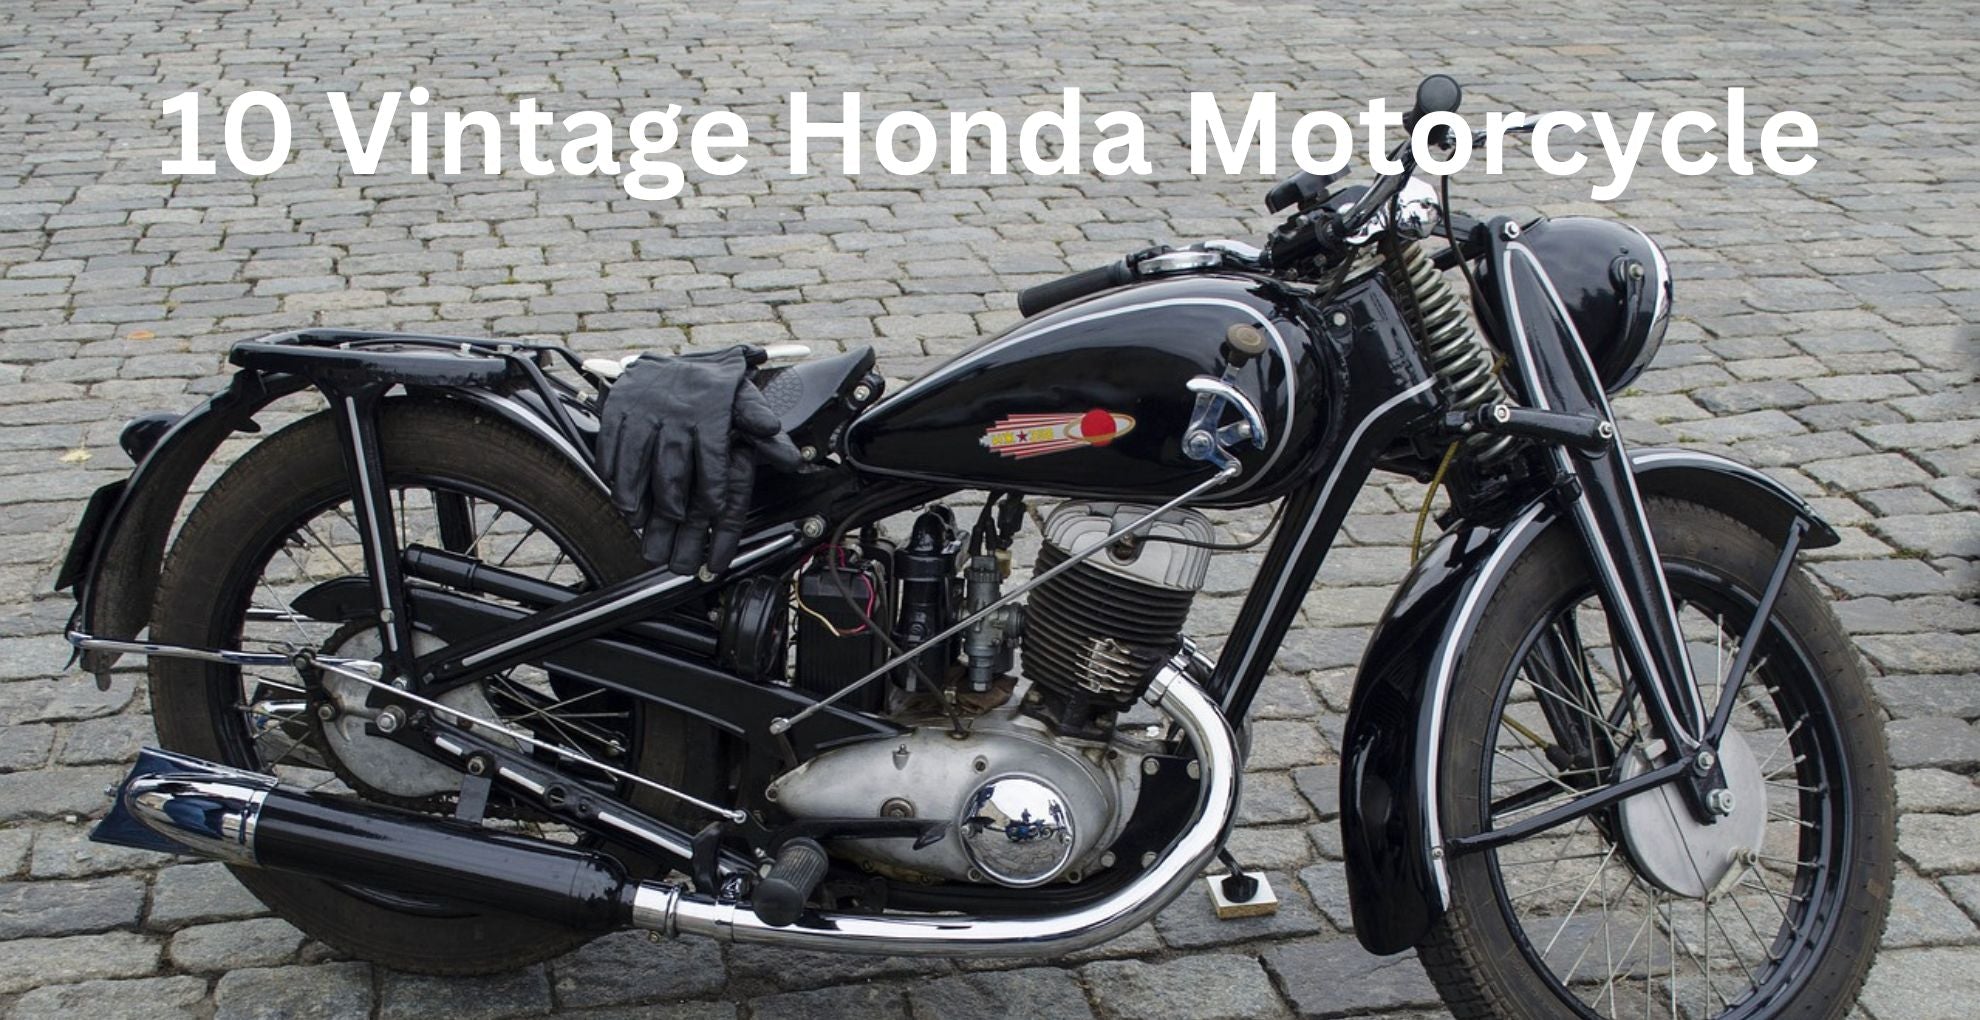 Honda CBX Motorcycles for Sale - All Models & Styles